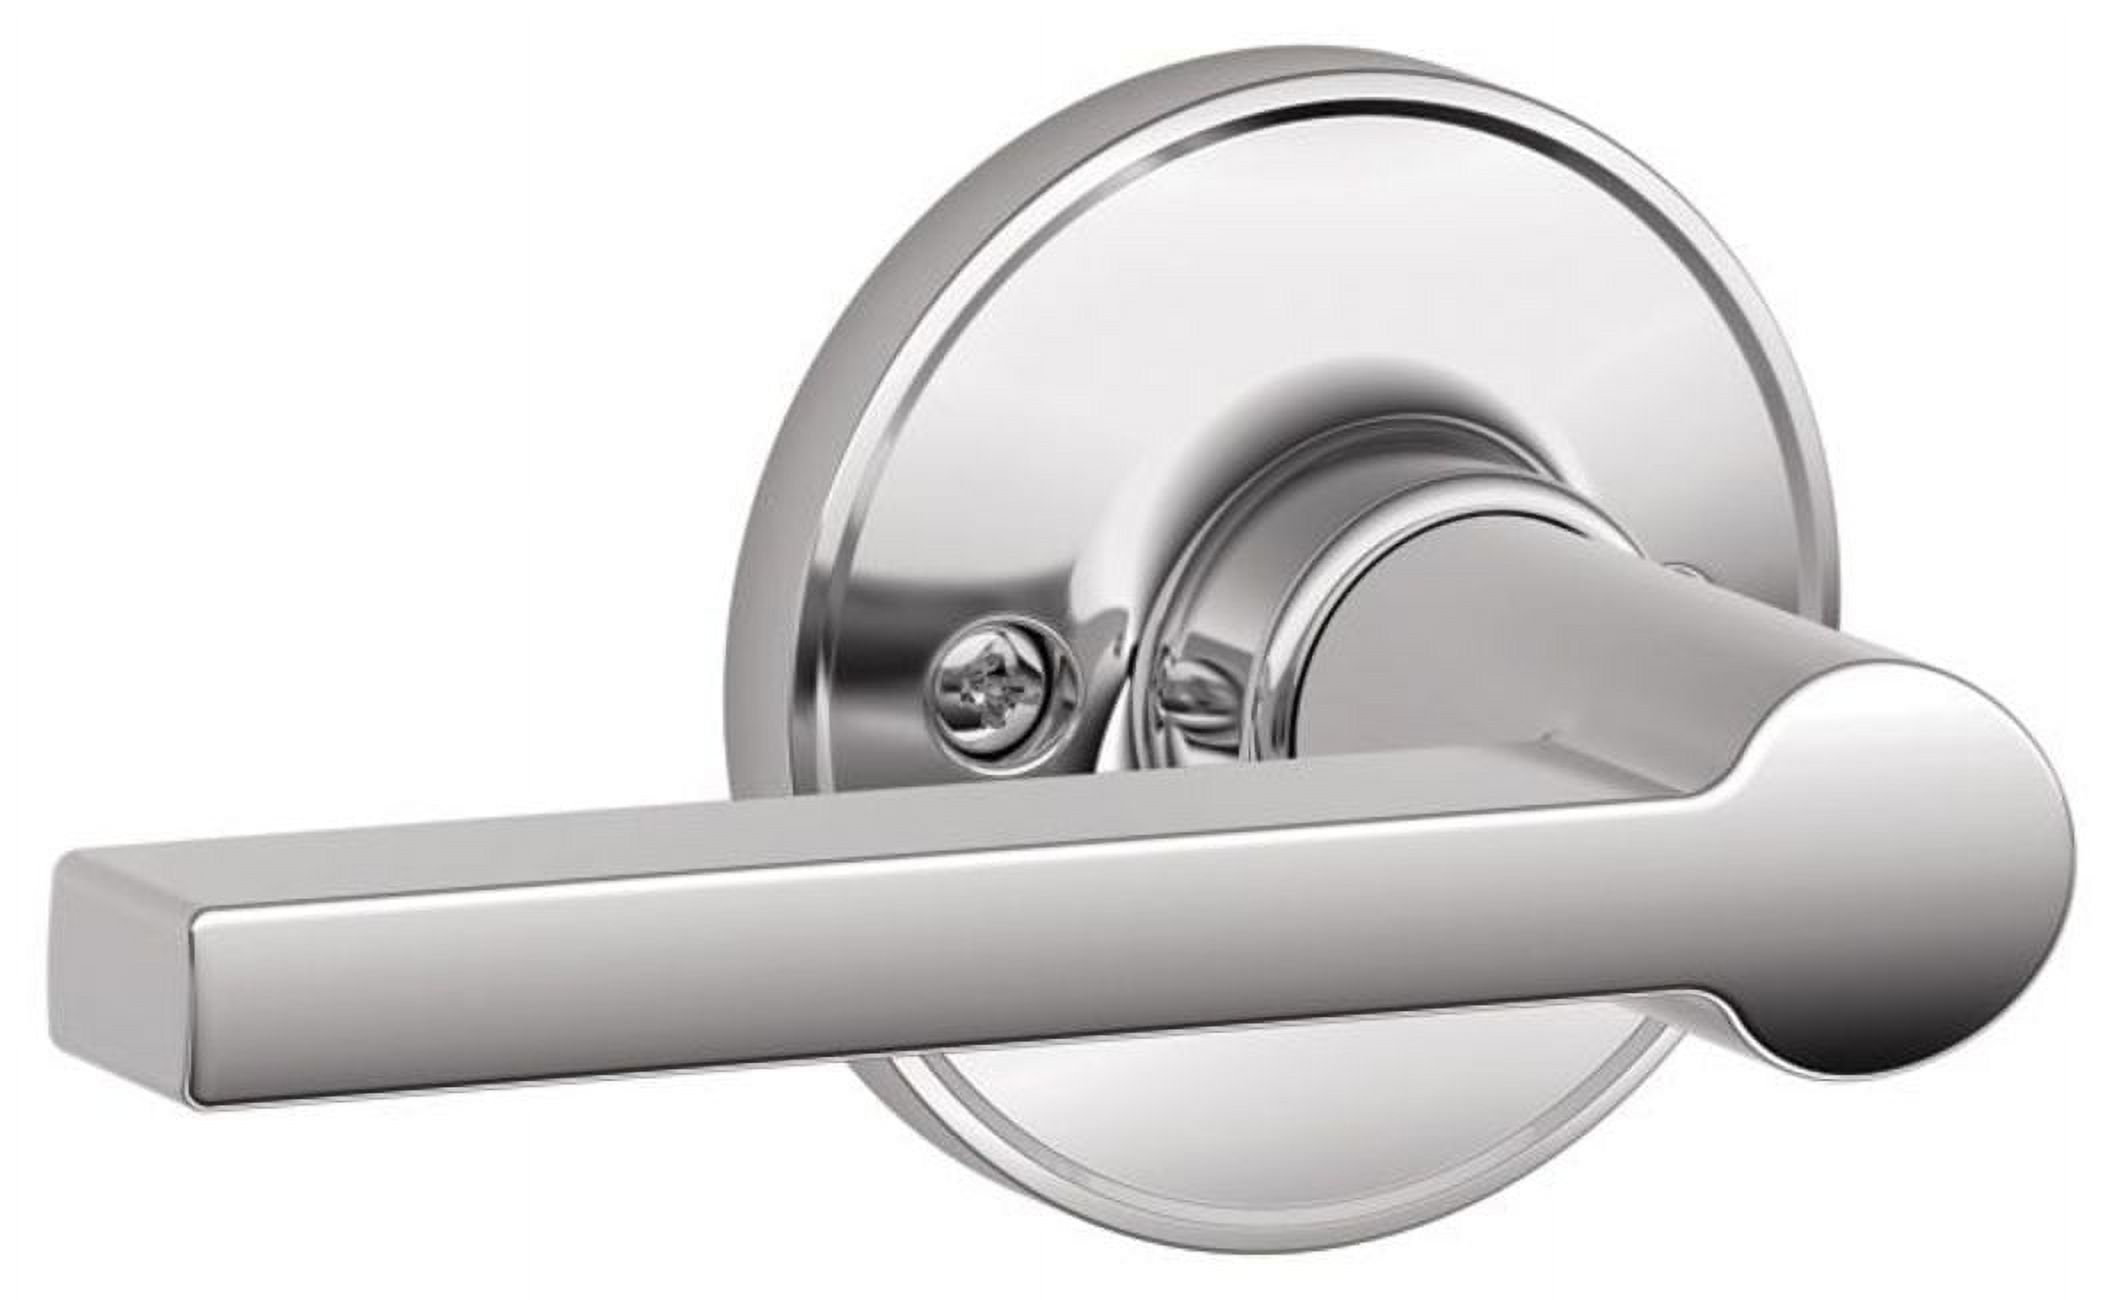 Dexter by Schlage J170SOL625 Solstice Decorative Inactive Trim Lever, Bright Chrome - image 1 of 4